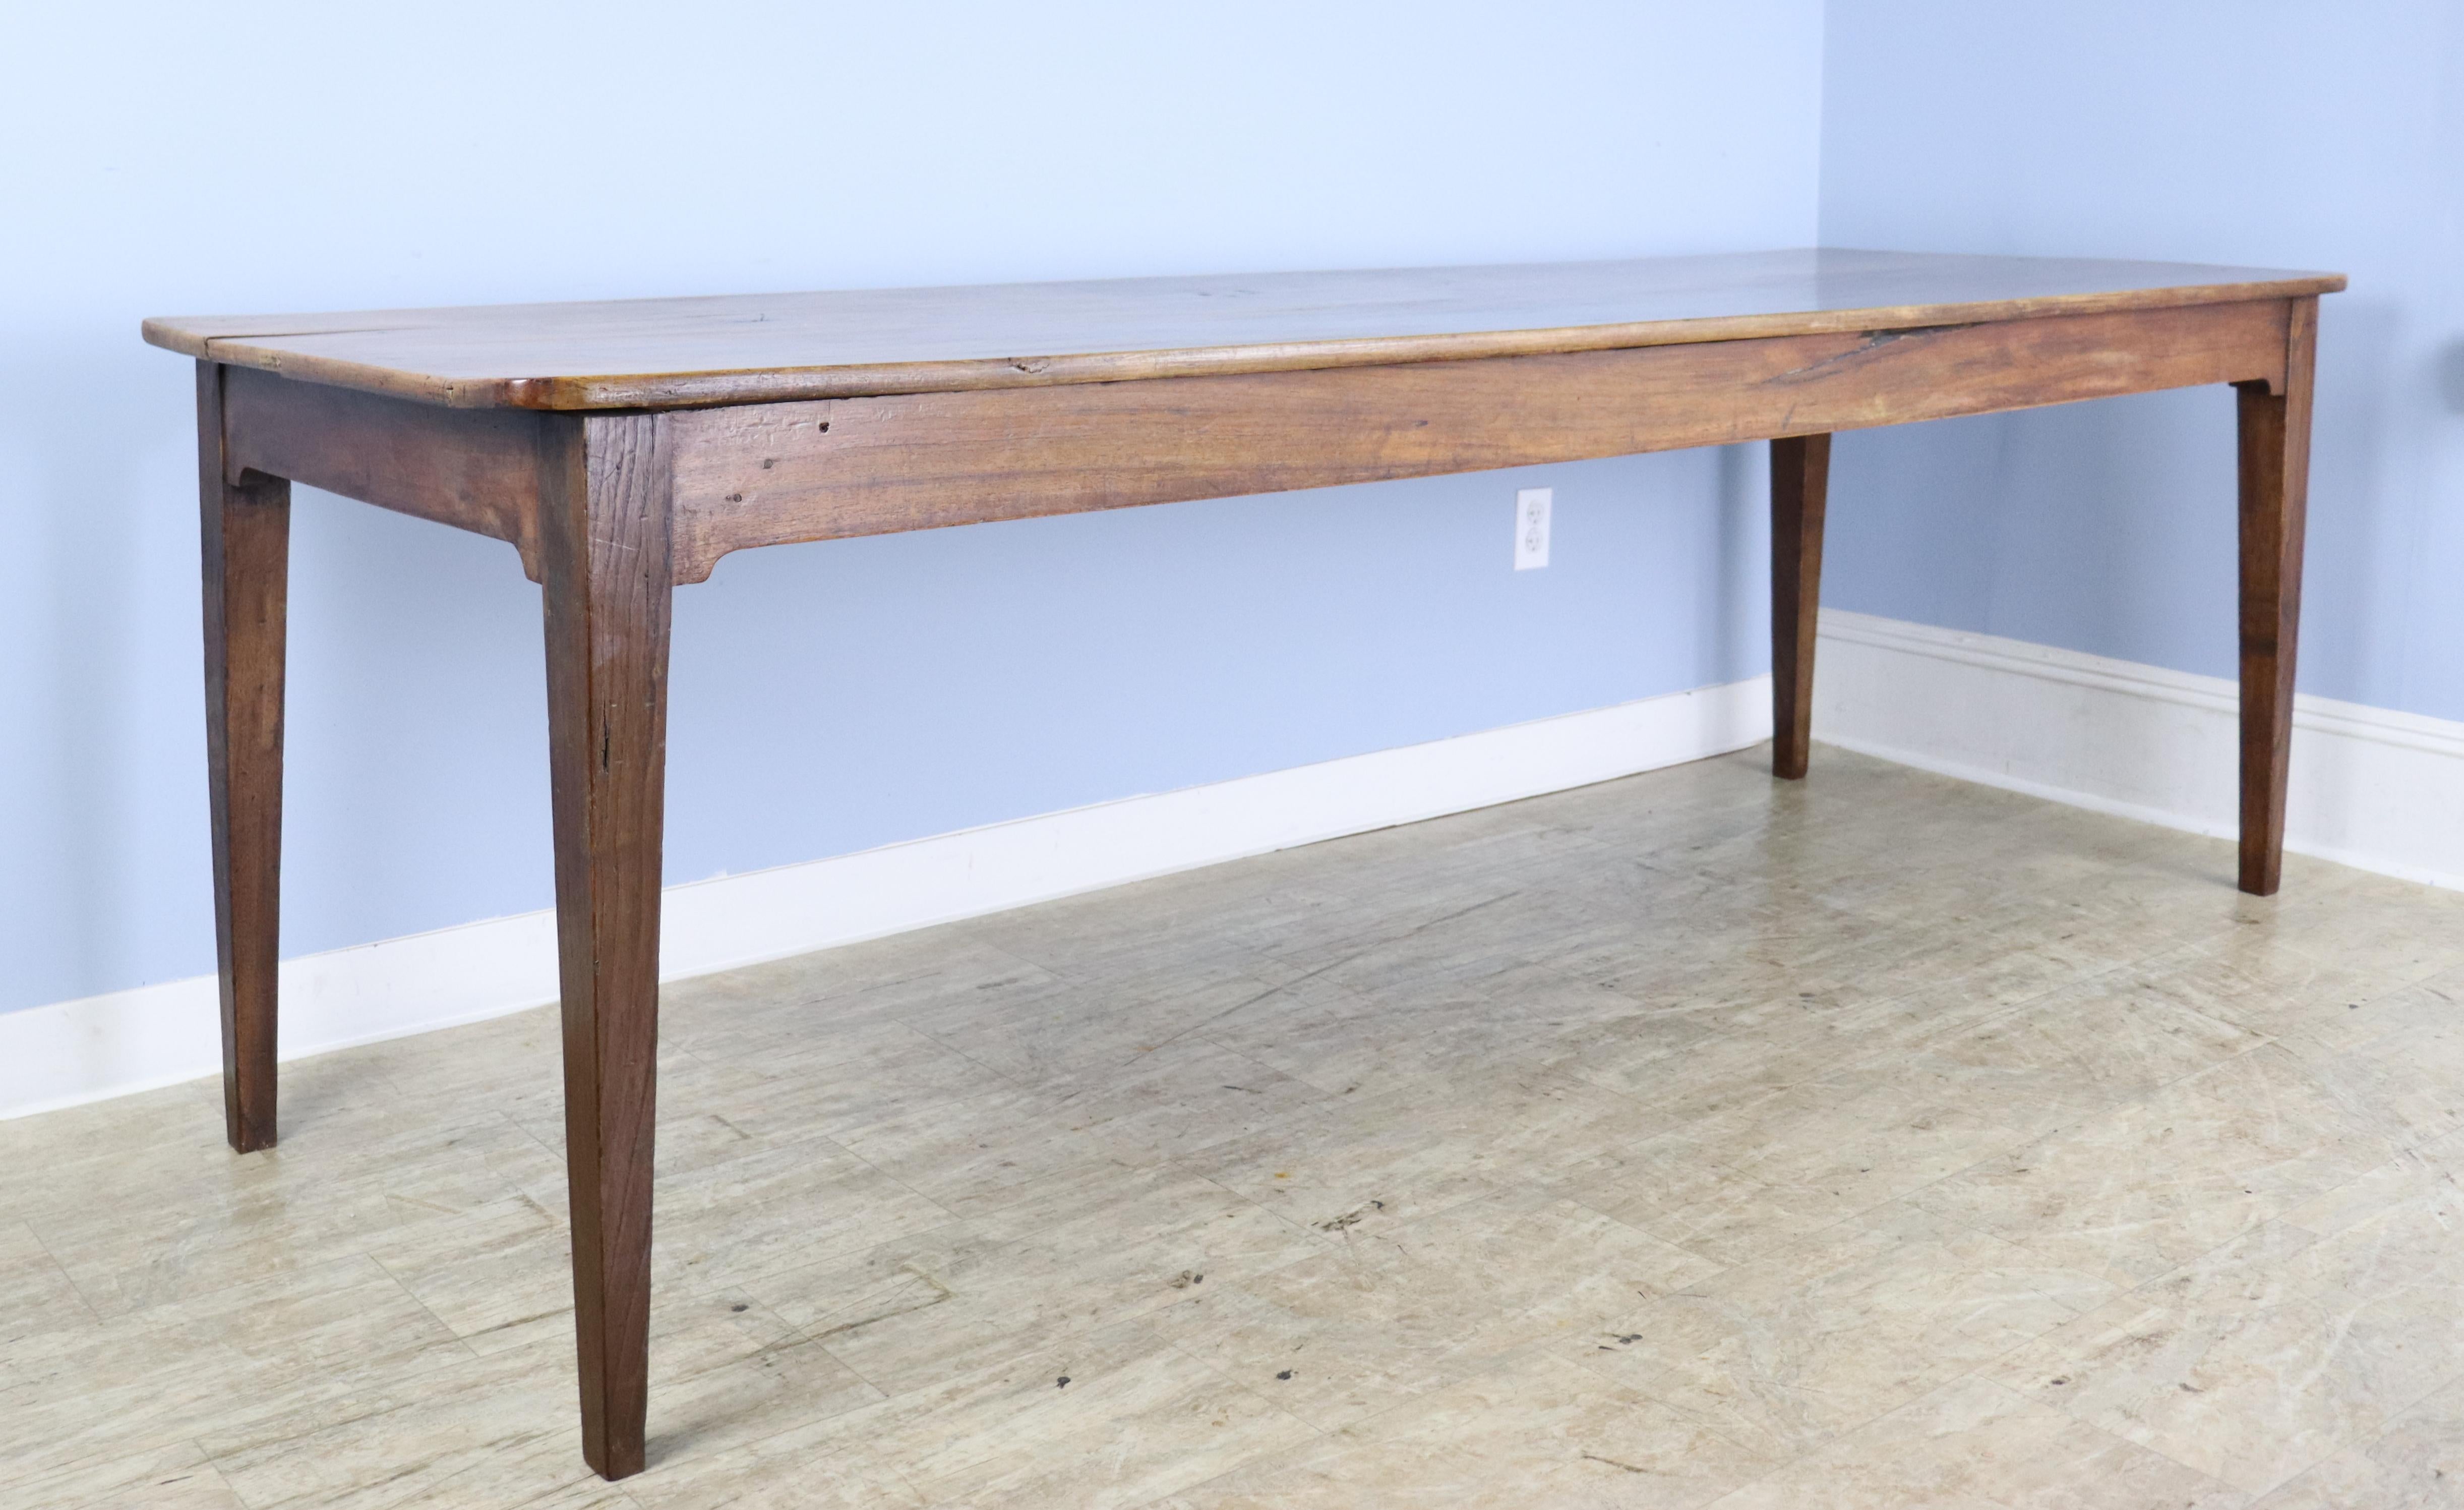 A very pretty long slim pale walnut farm table.  The original walnut legs have been replaced with a rich brown chestnut which complements the walnut.  The top is quite clean and has nice grain and good patina.  The generous apron height of 25.75